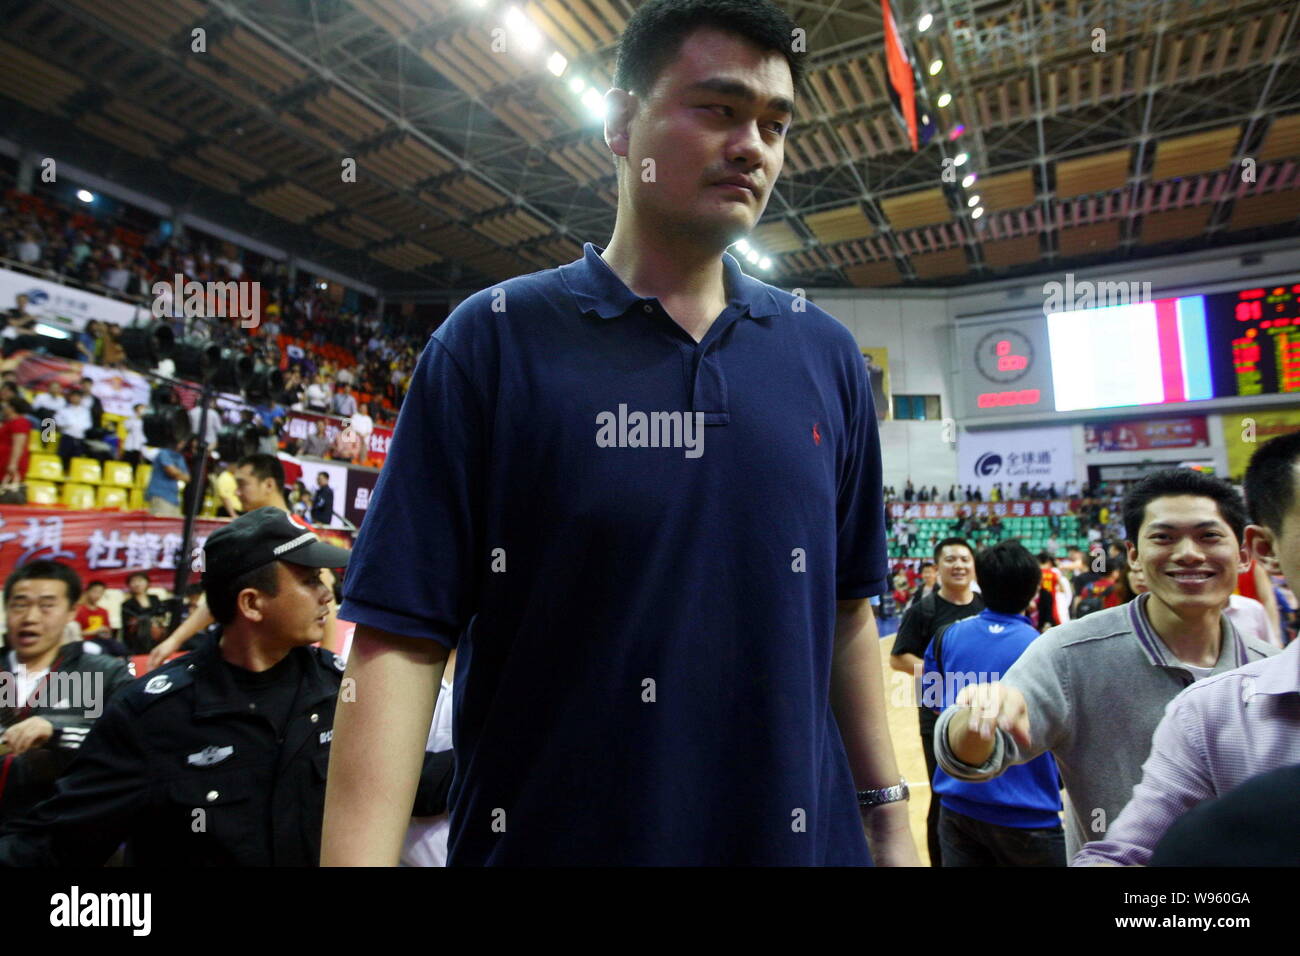 Retired Chinas basketball star Yao Ming is pictured during his friends farewell match in Dongguan city, south Chinas Guangdong province, 6 April 2012. Stock Photo